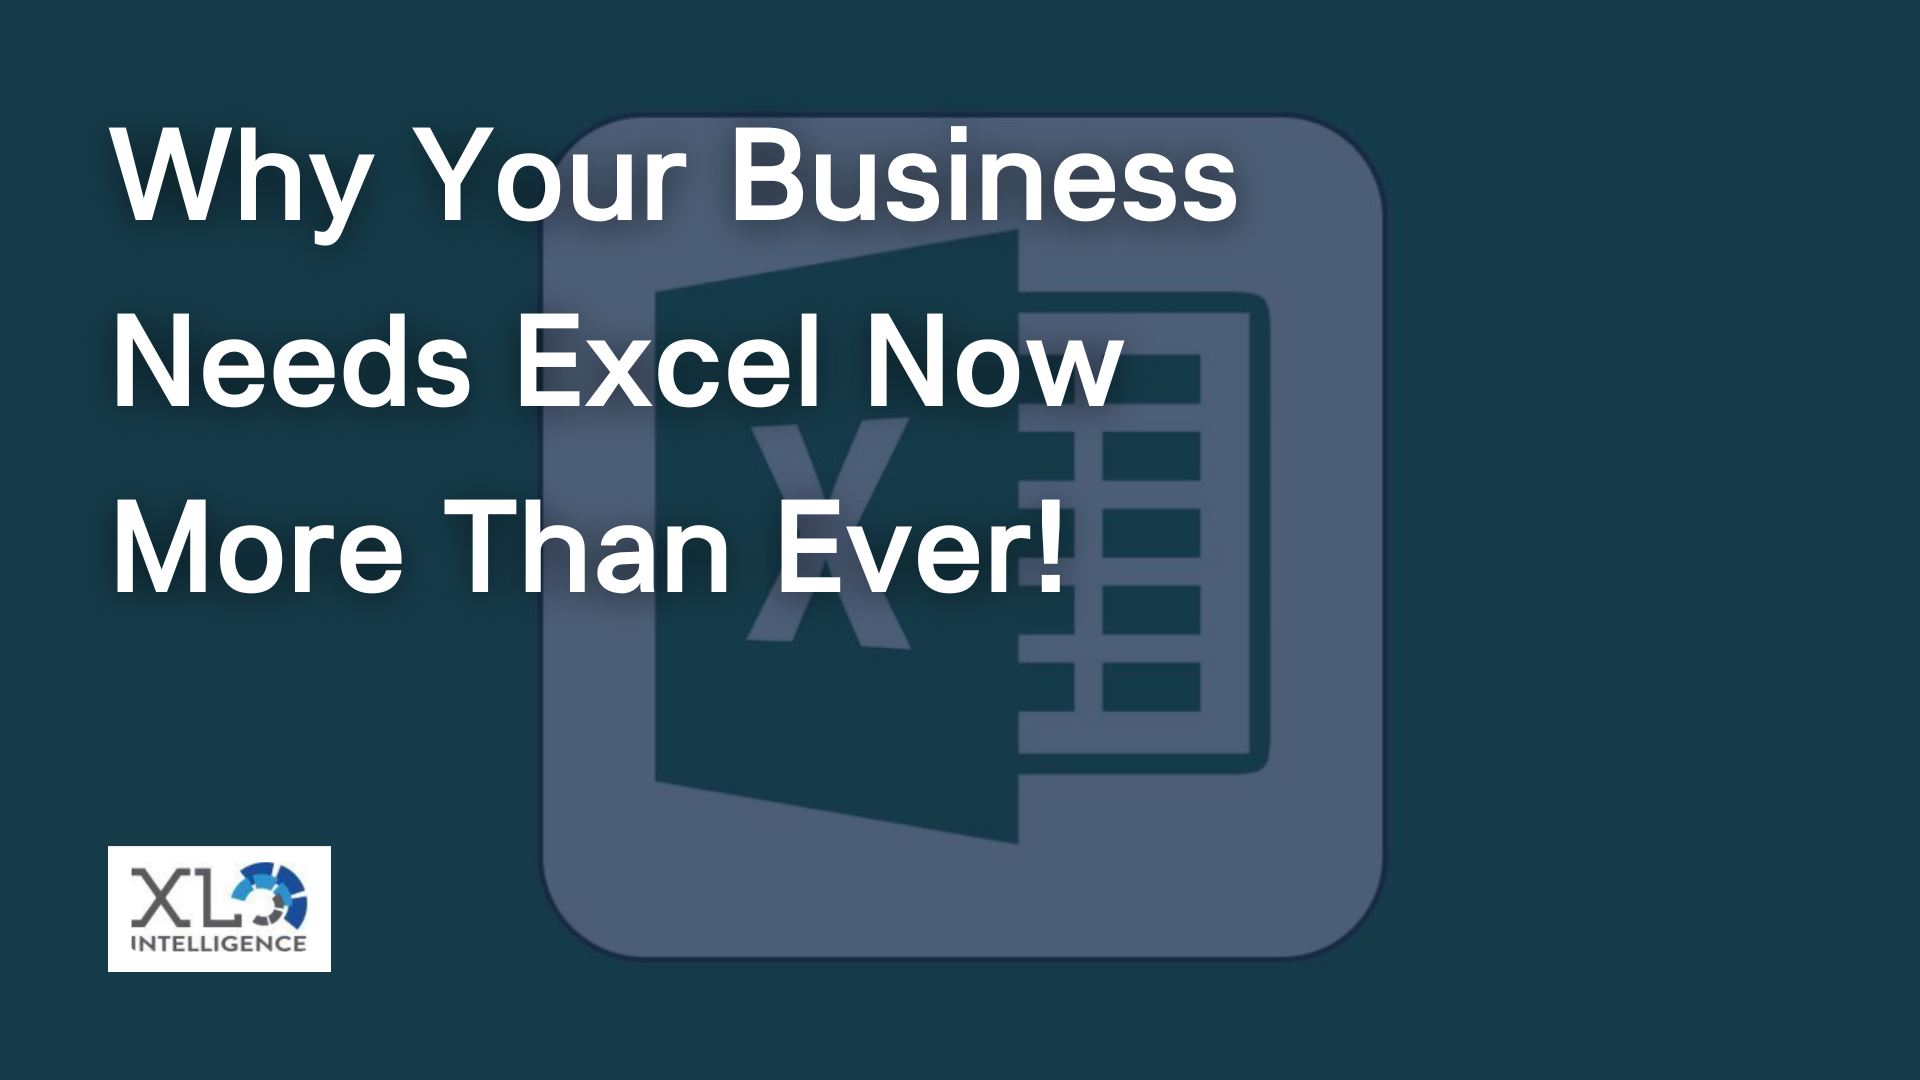 Why Your Business Needs Excel Now More Than Ever